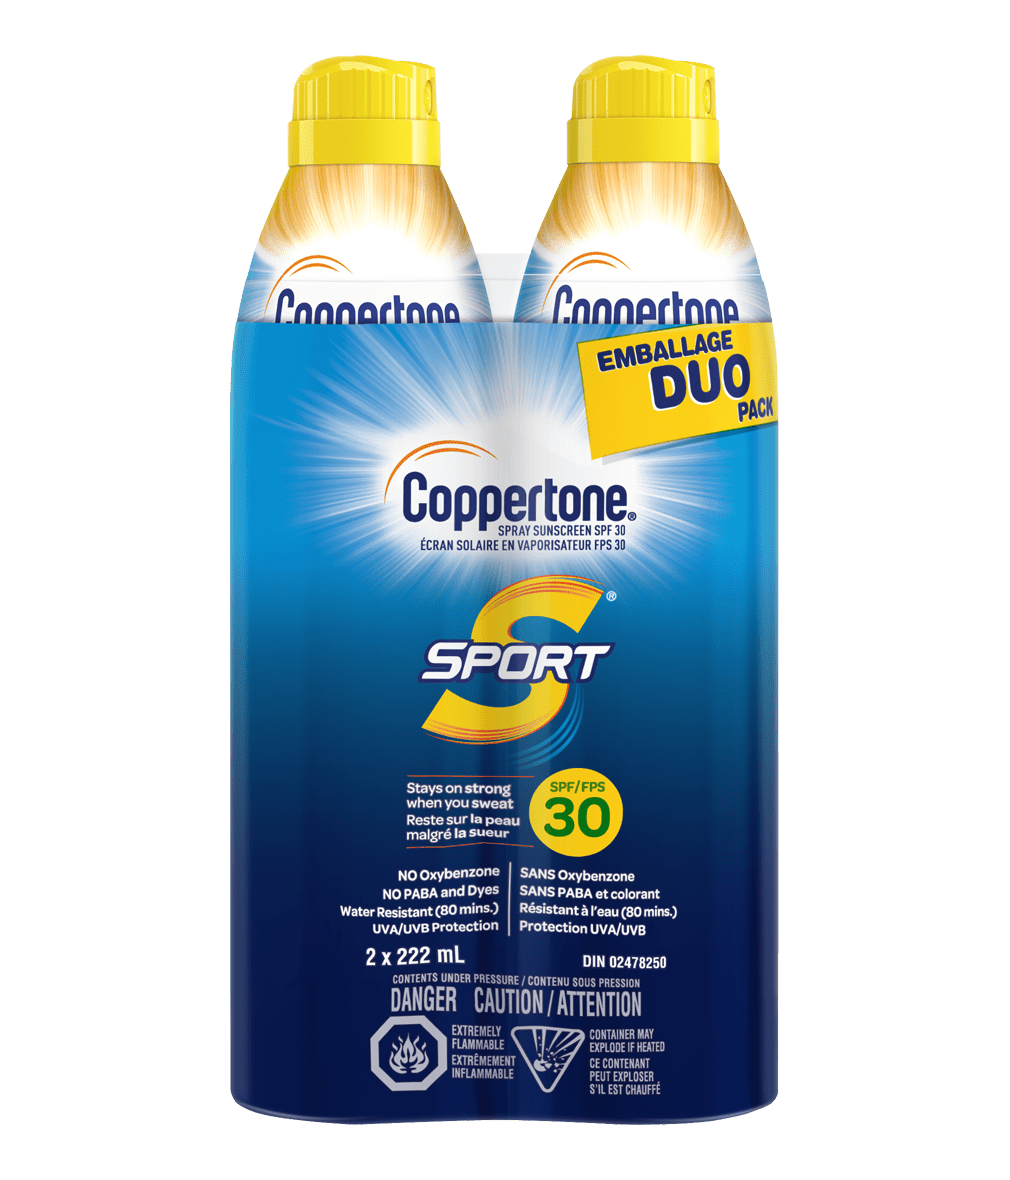 Coppertone SPORT® Sunscreen Continuous Spray SPF30 Duo Pack